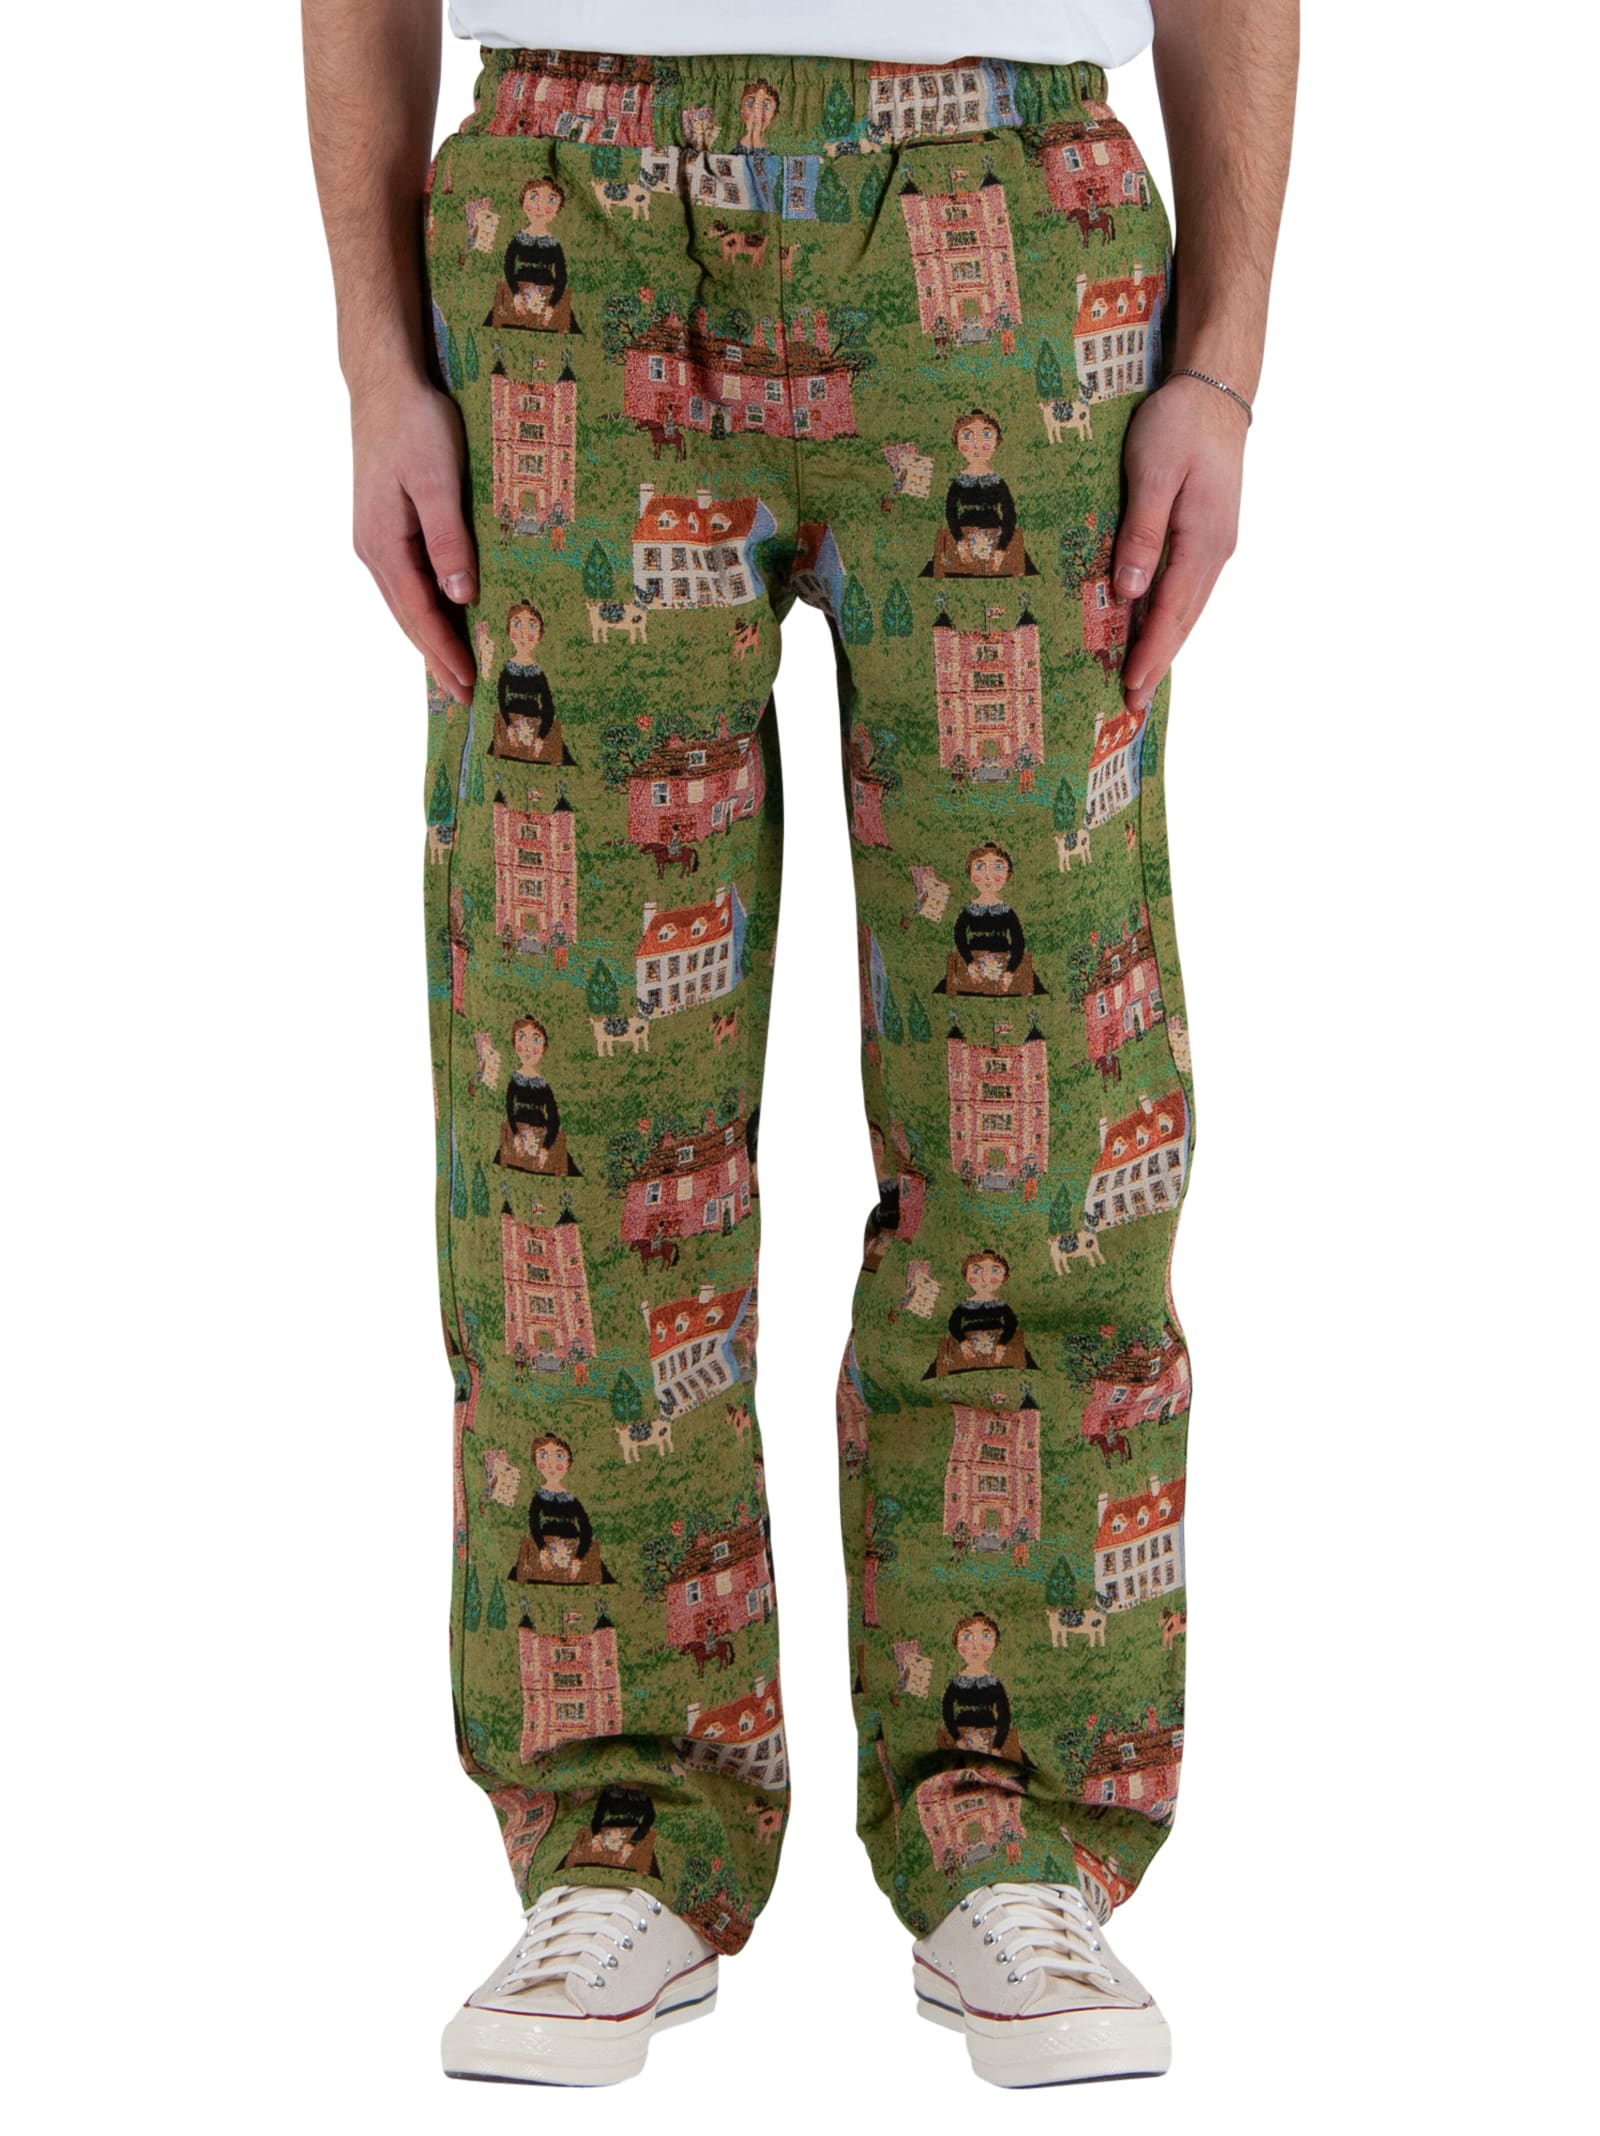 Chinatown Market Tapestry Pants